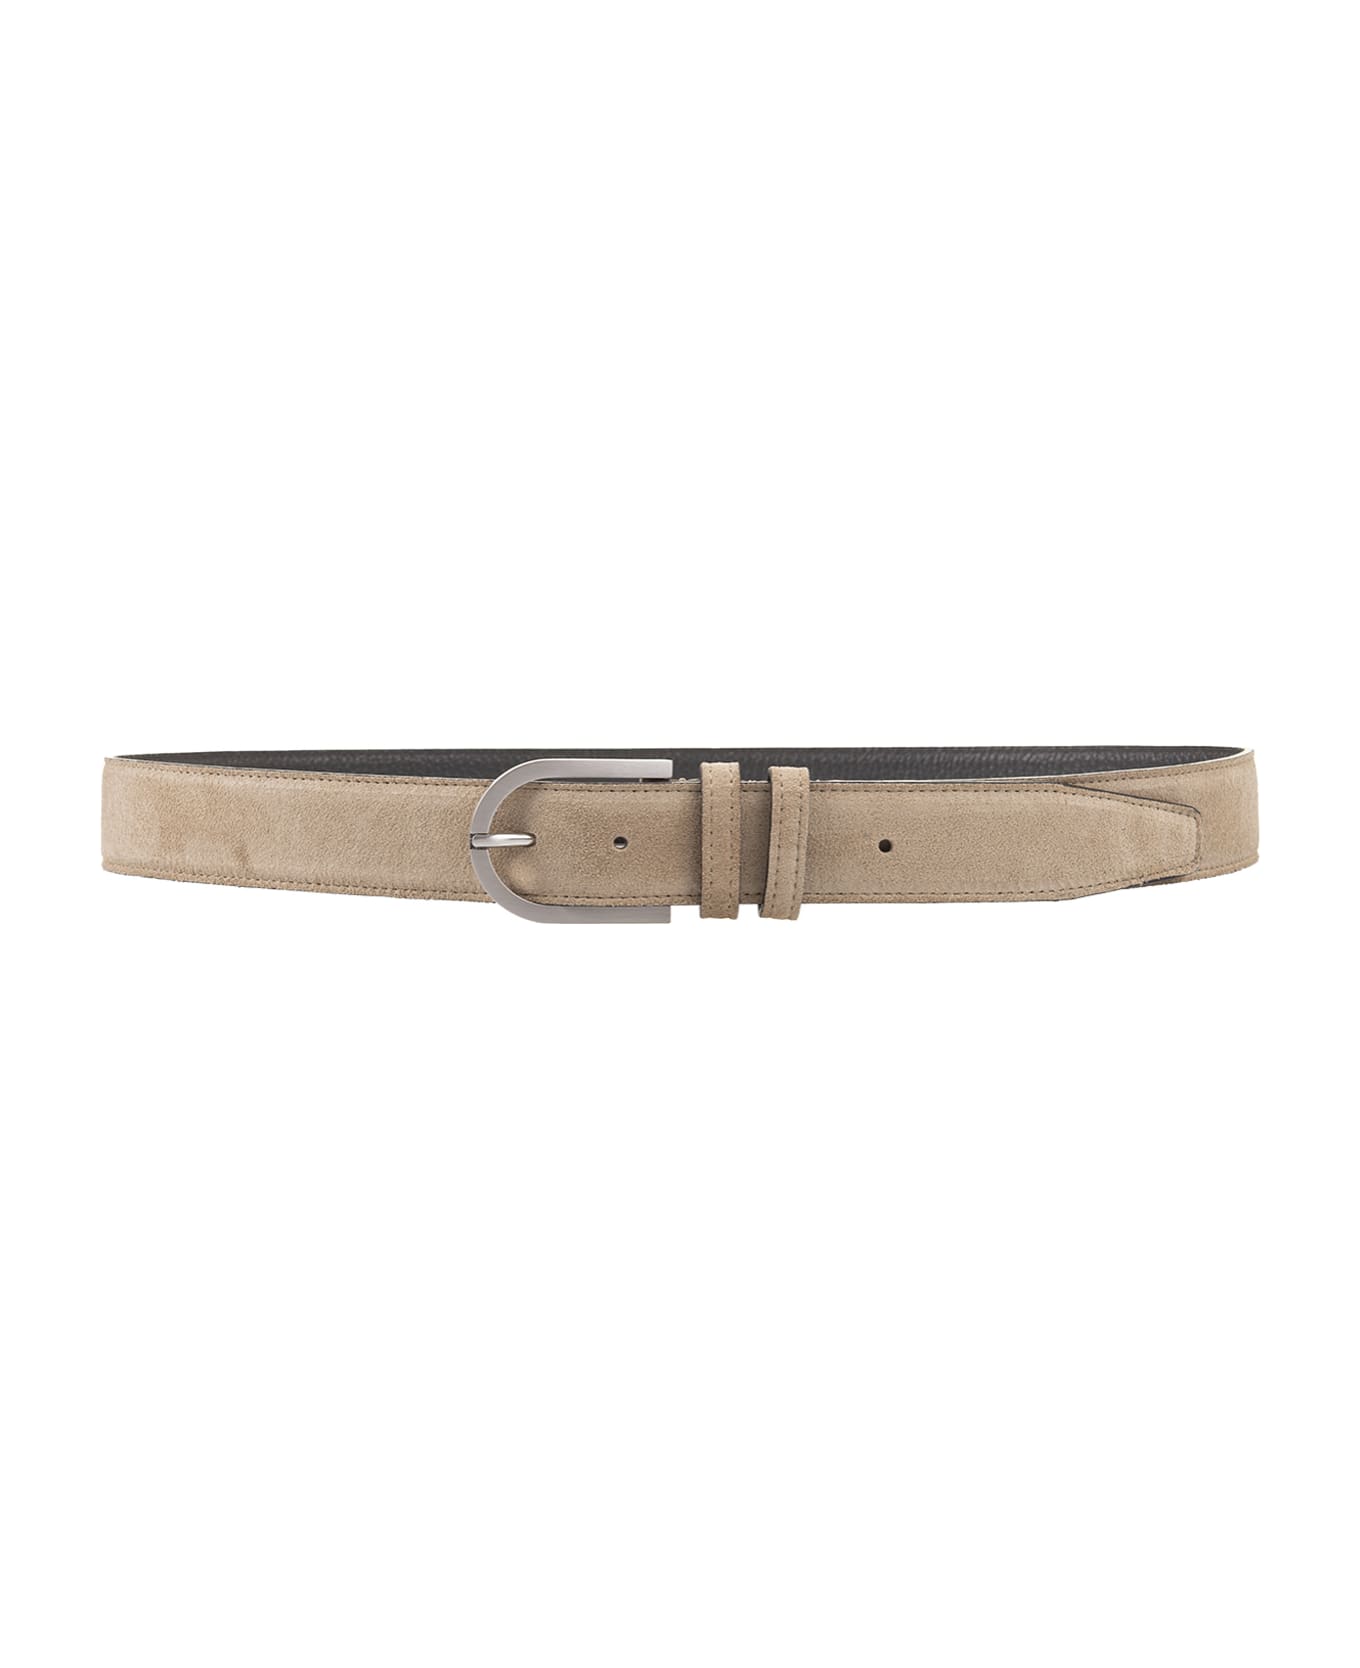 Kiton Beige Suede Belt With Silver Buckle - Brown ベルト